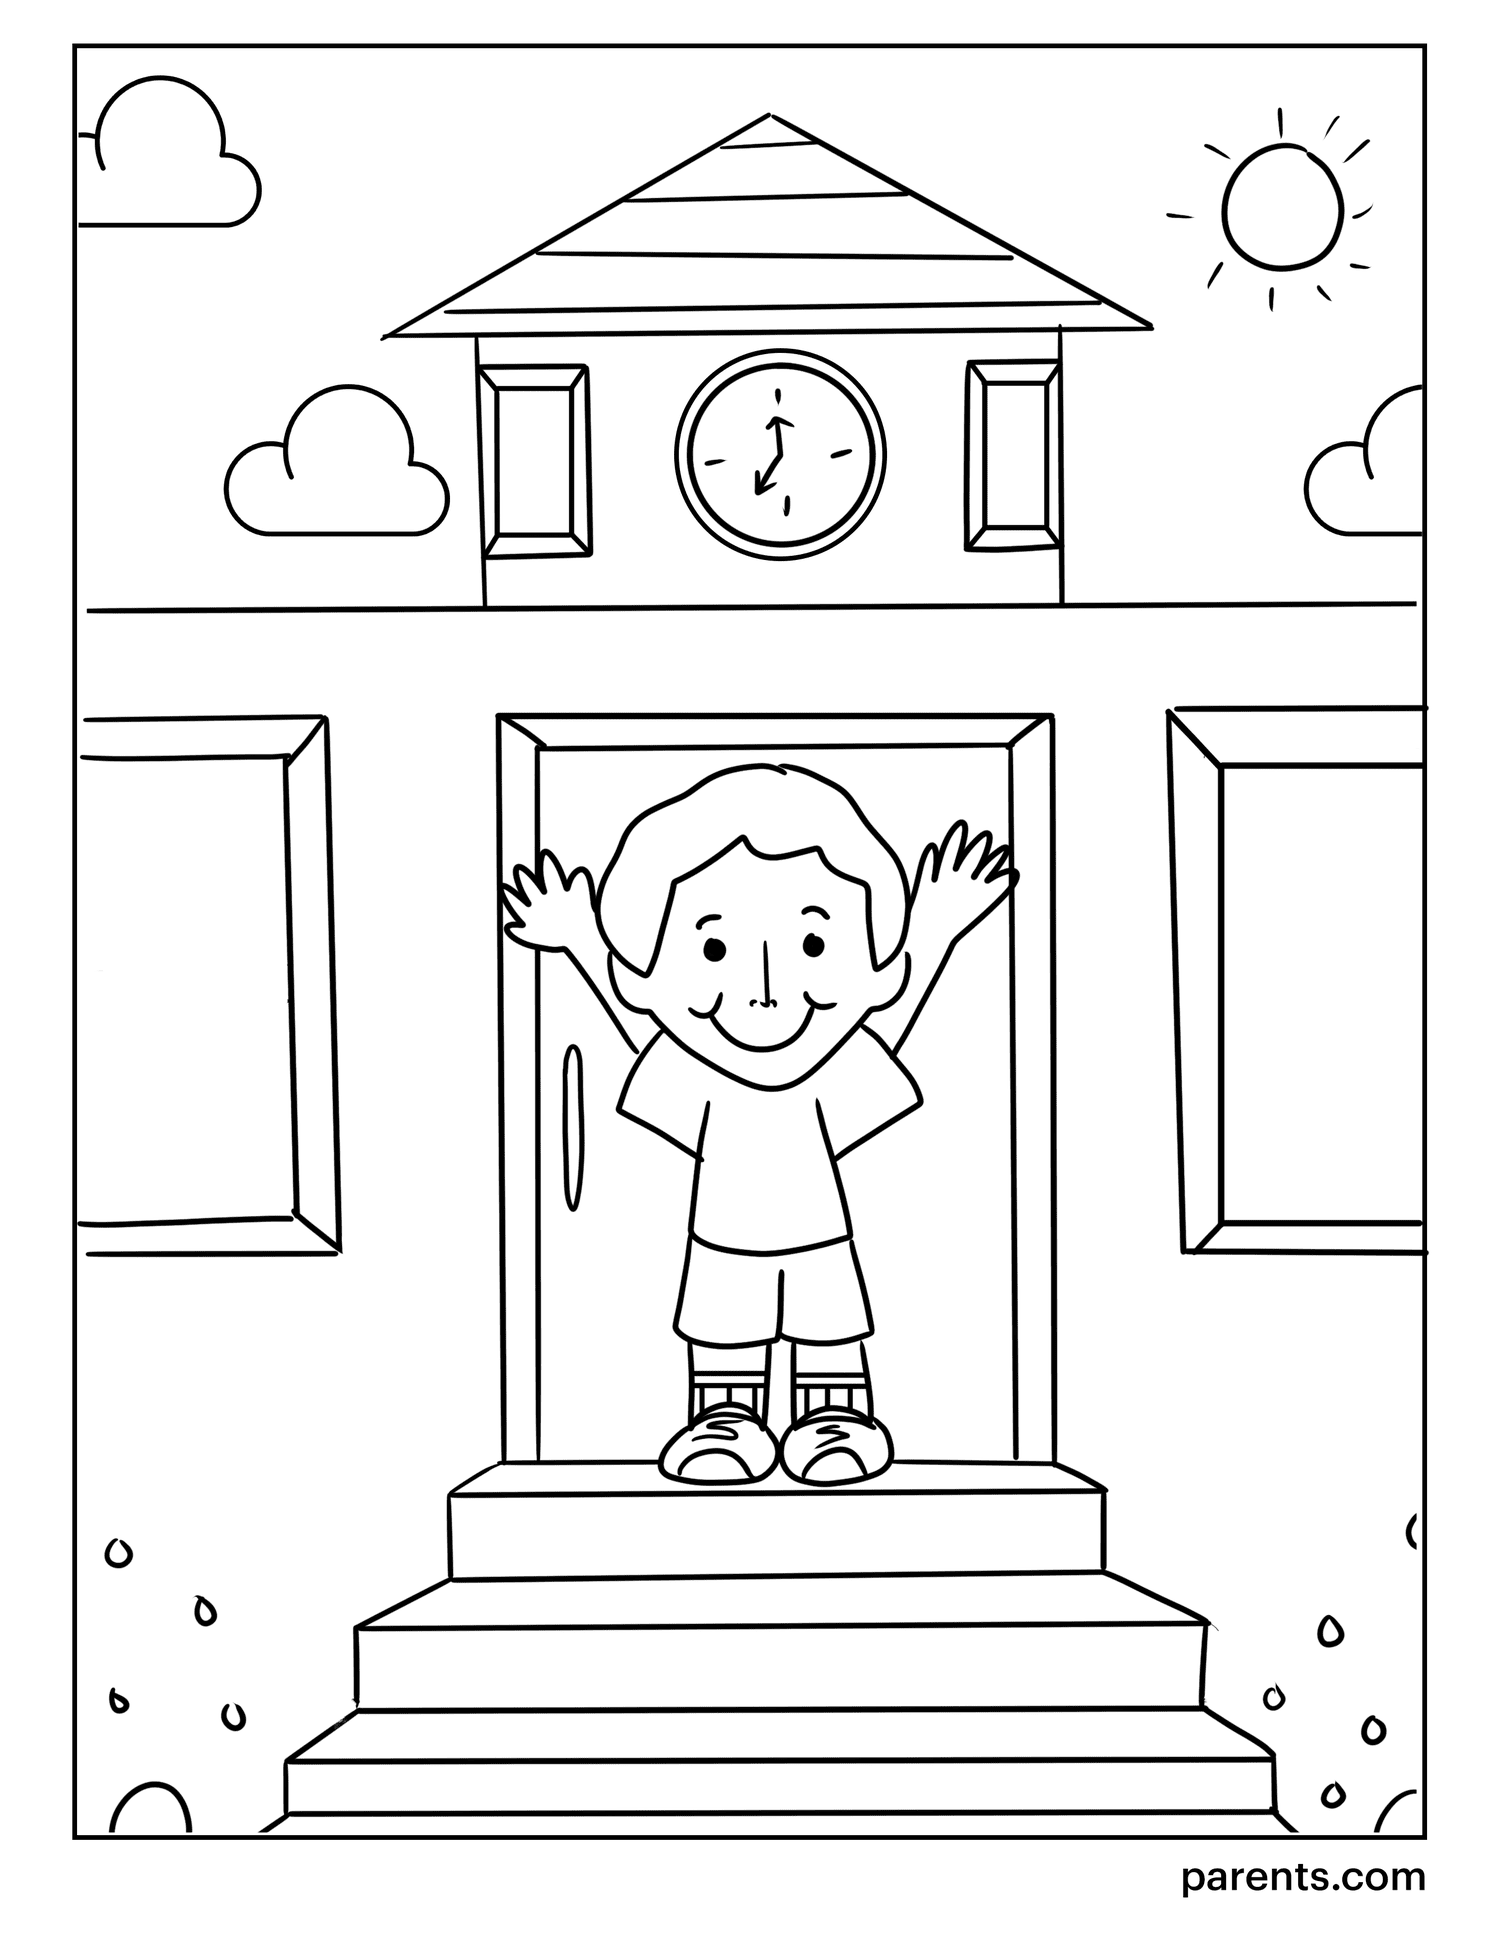 10 printable back to school coloring pages for kids parents